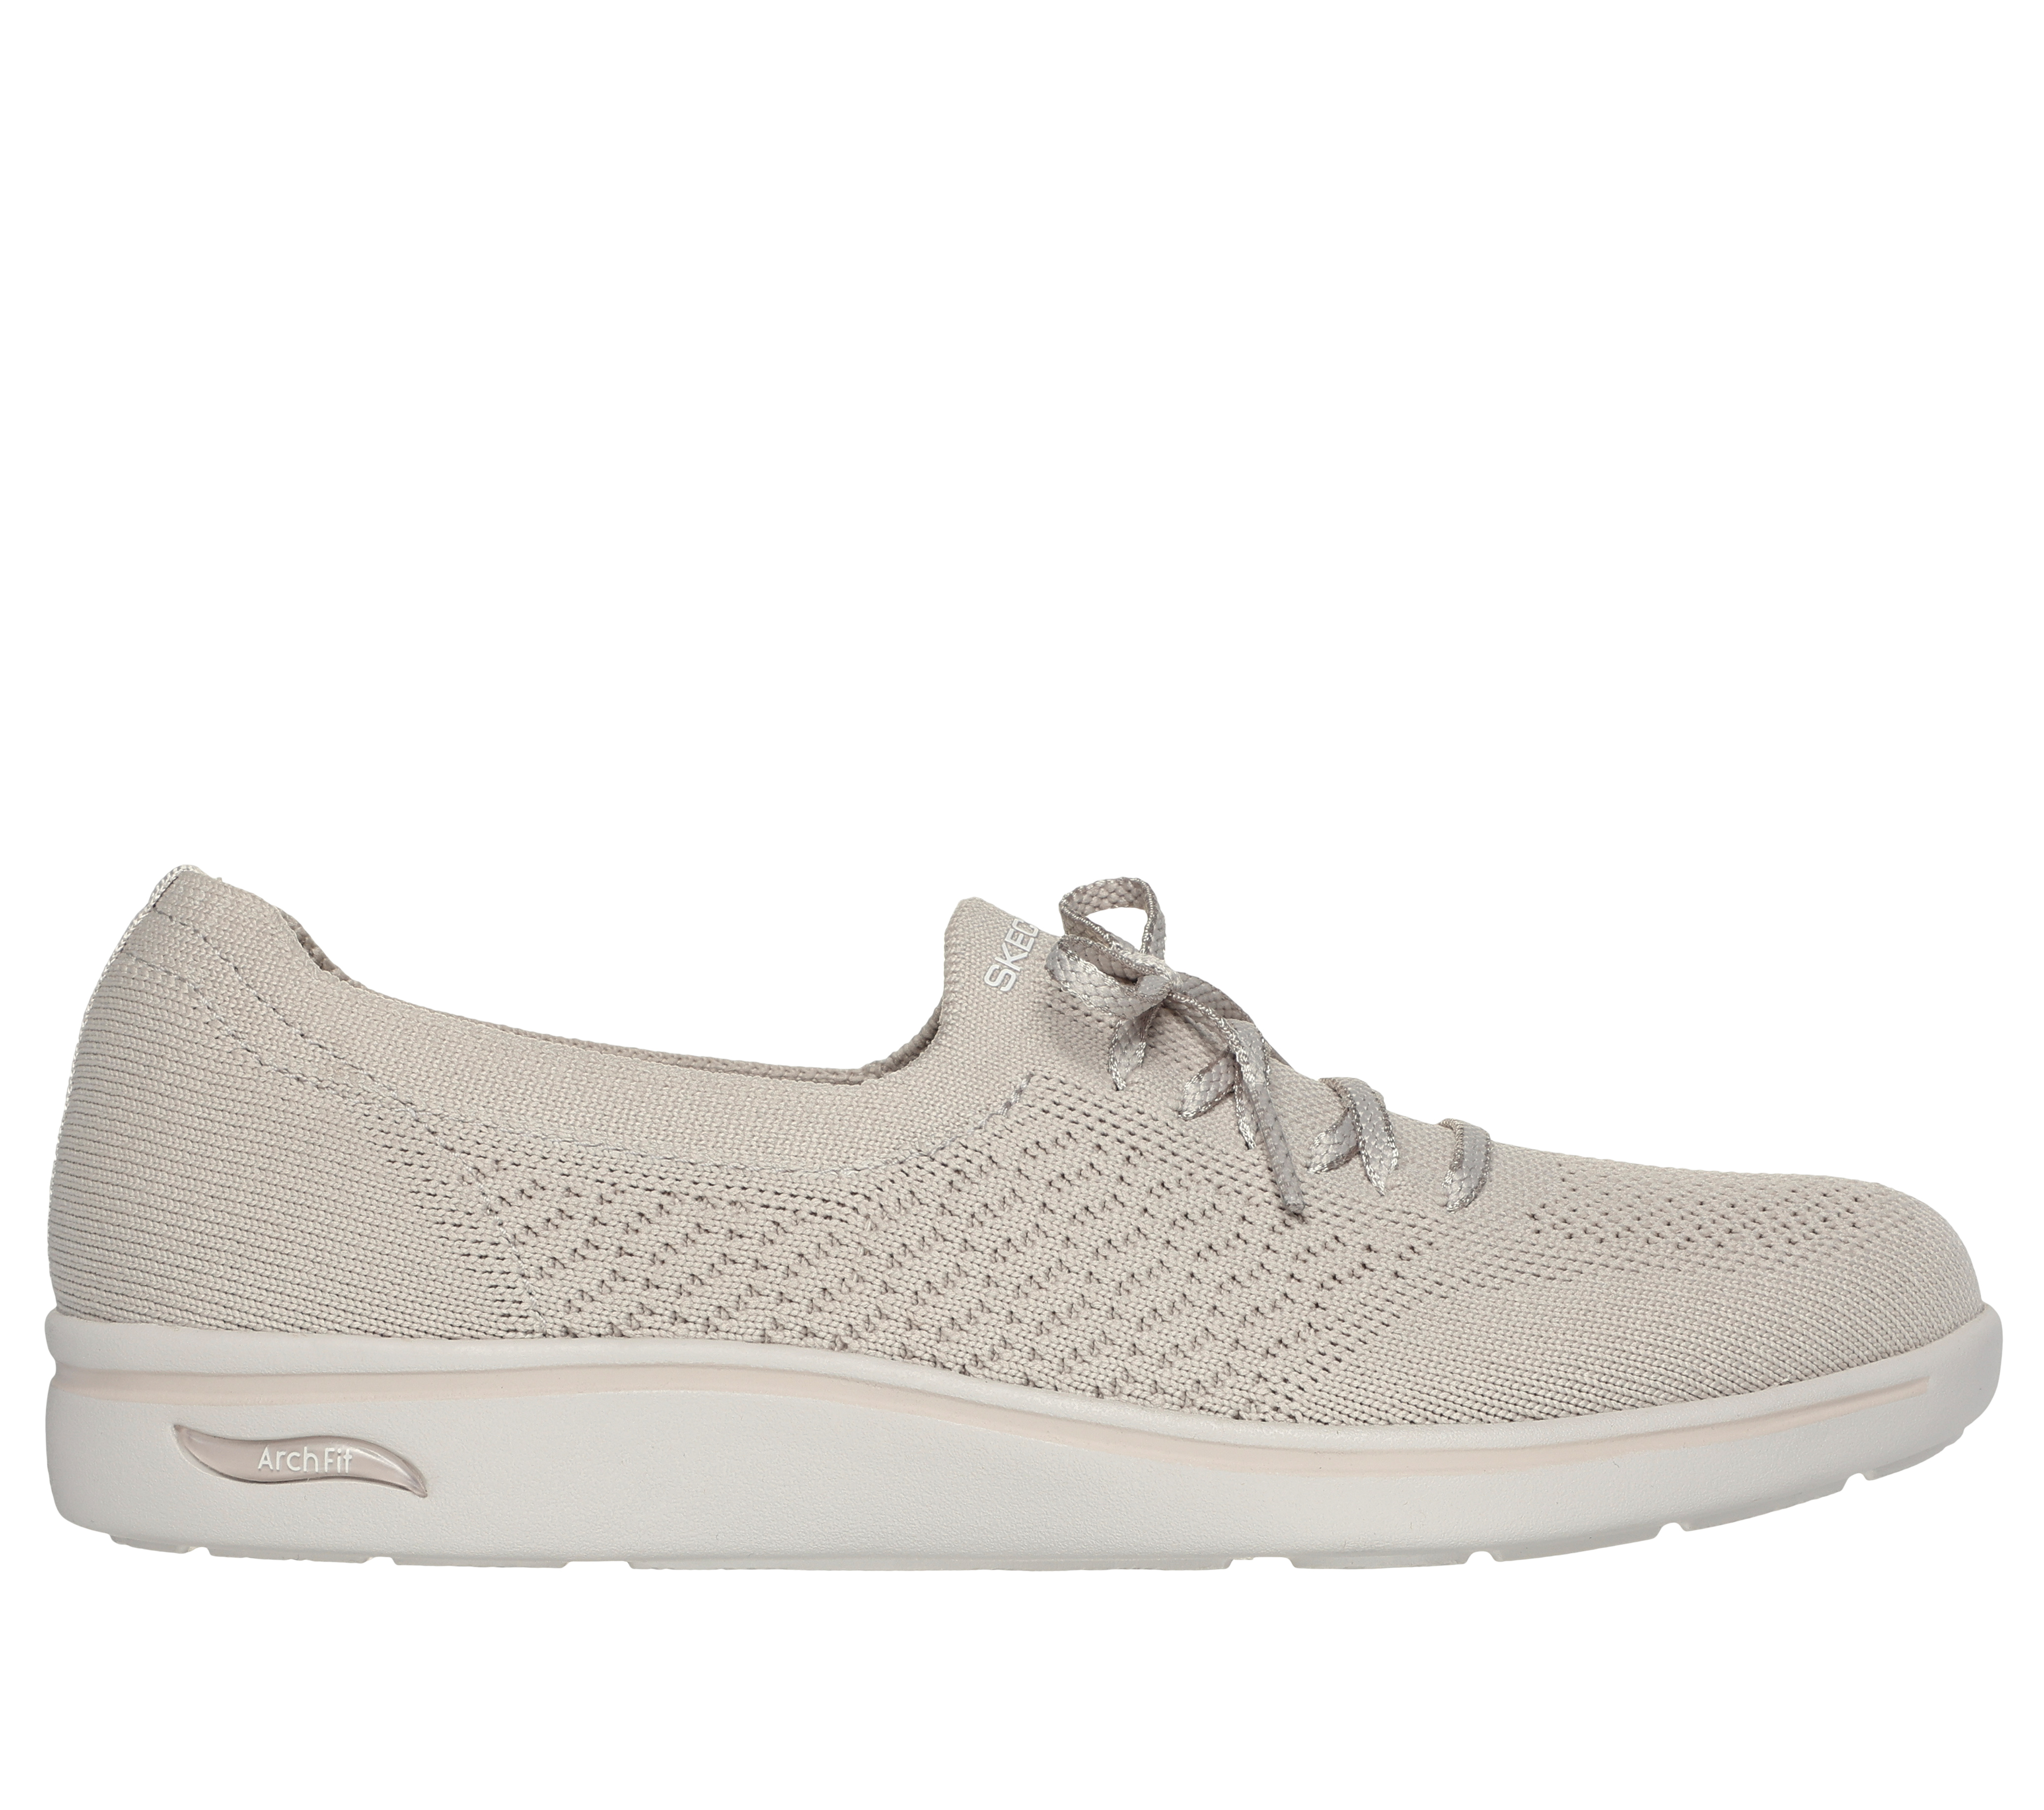 Arch Fit Uplift - Florence | SKECHERS